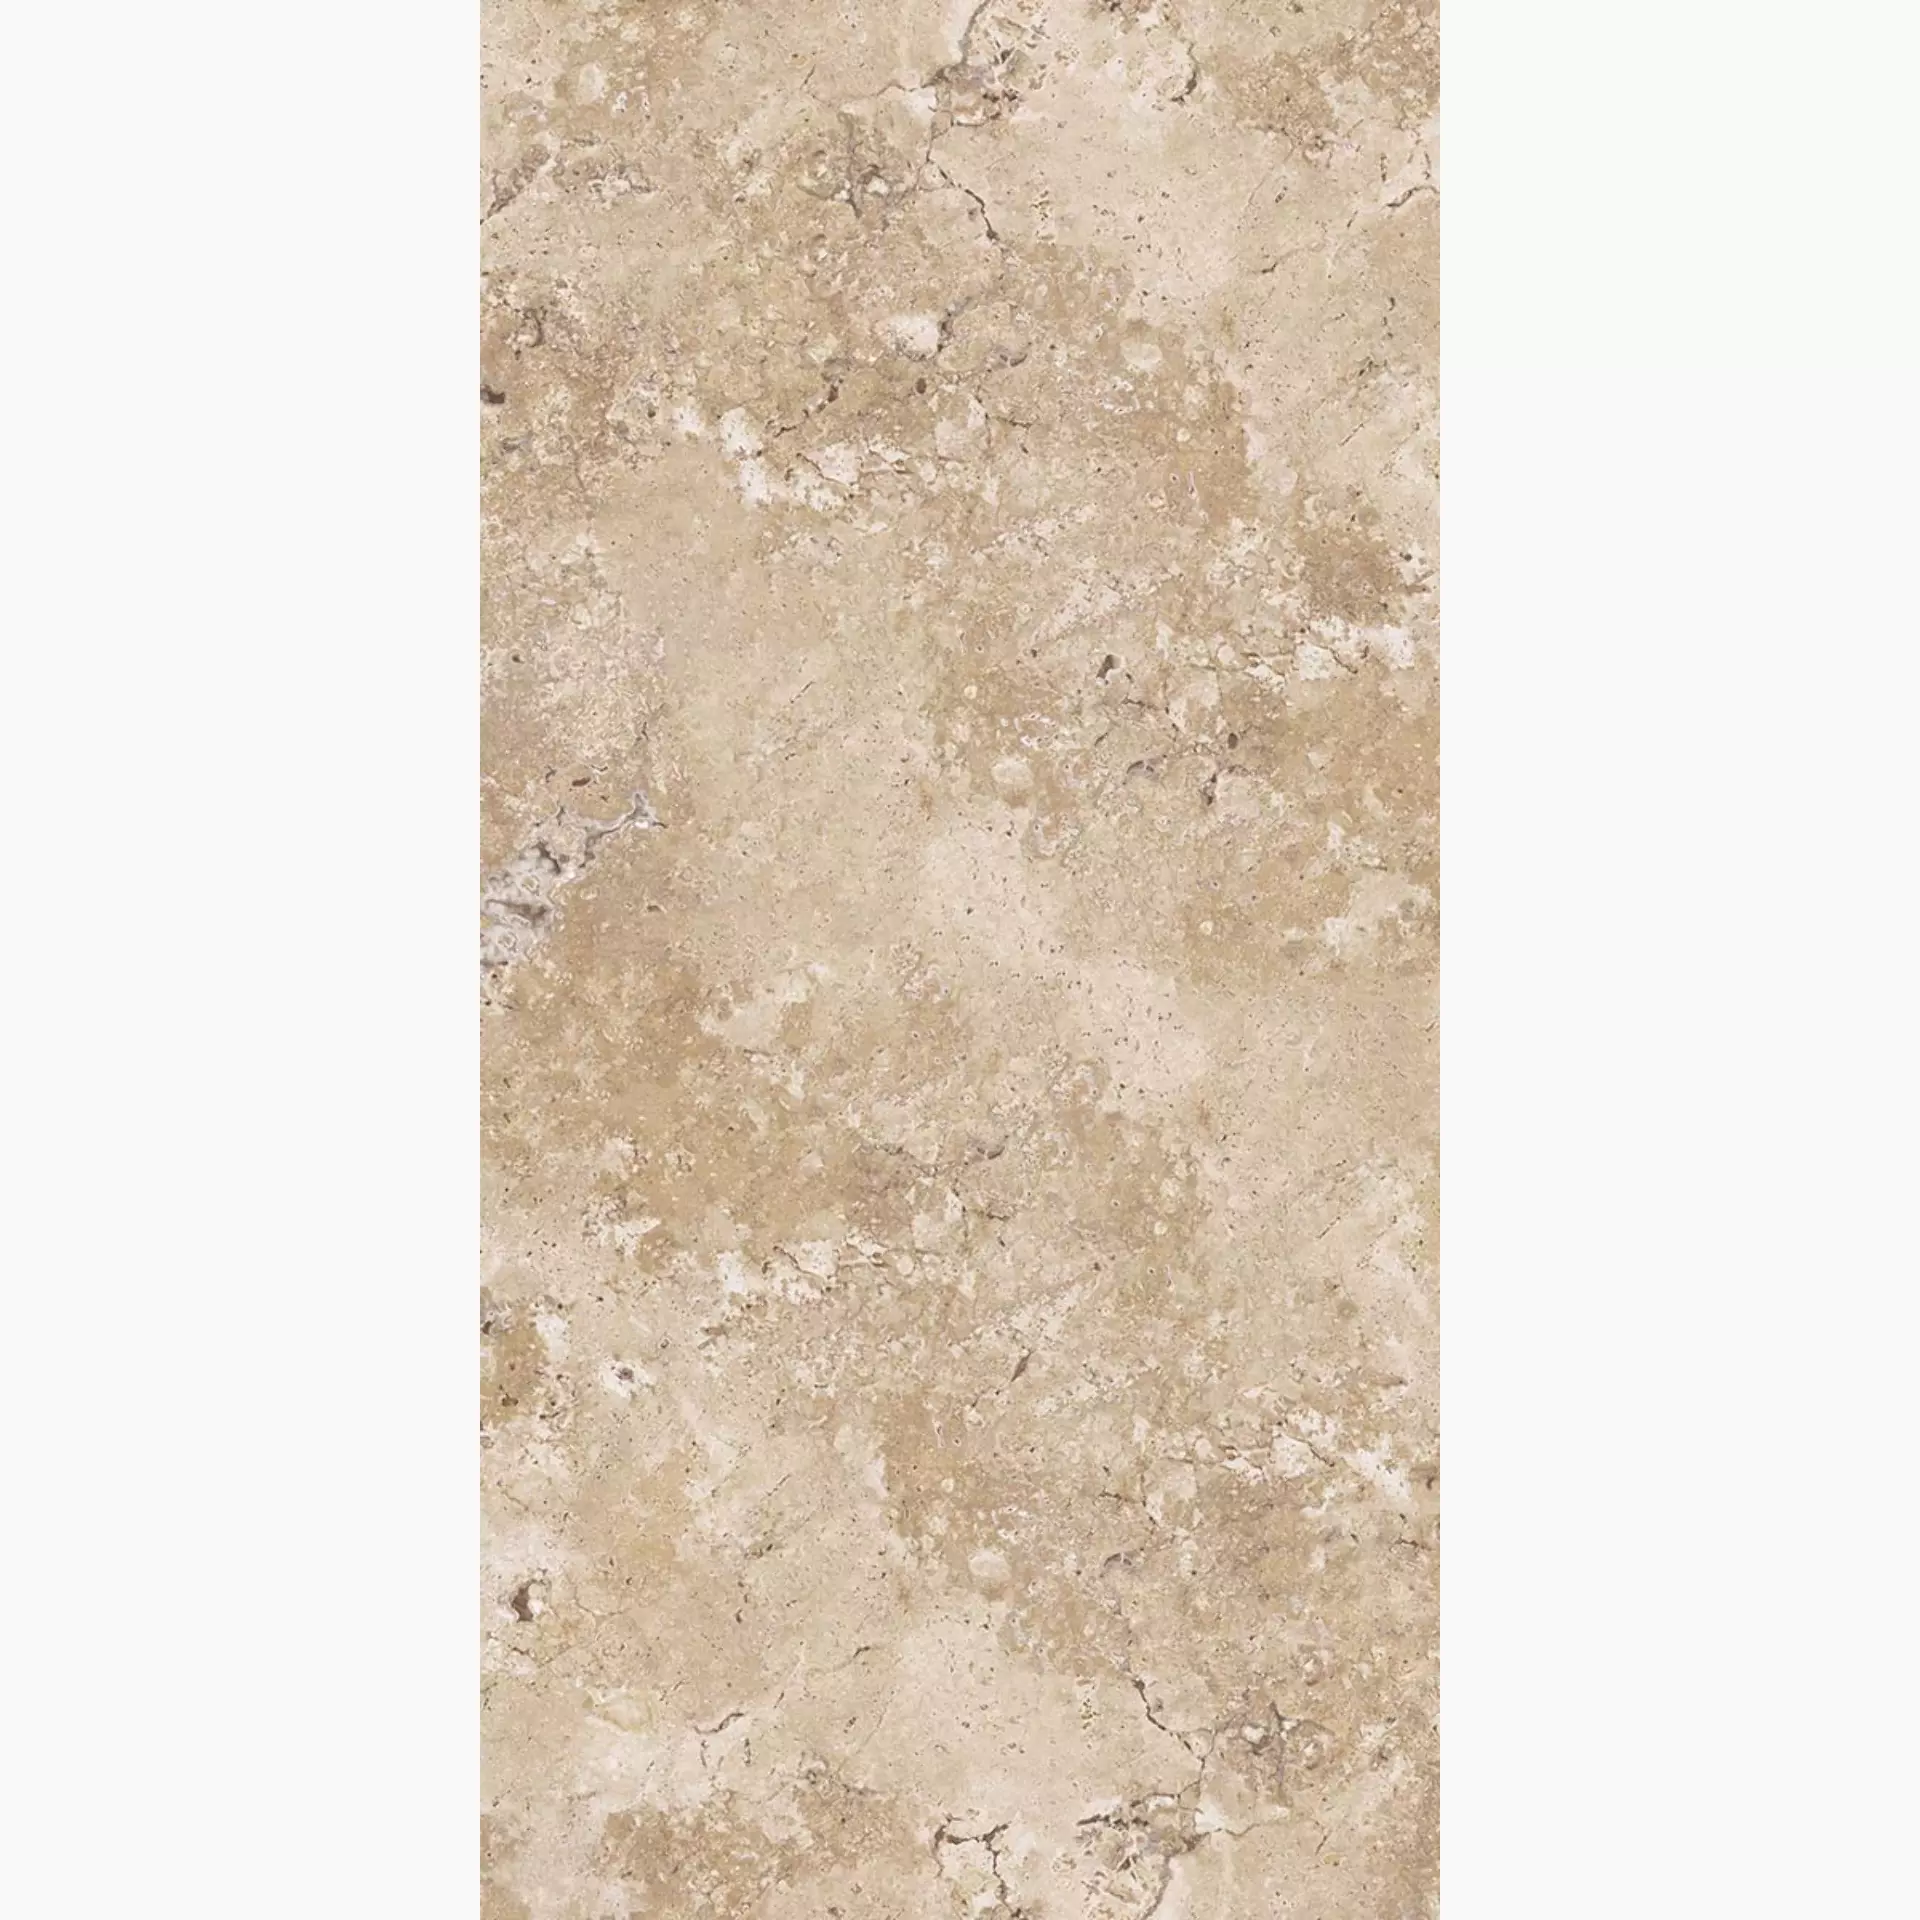 Keope Percorsi Frame Travertino Beige Spazzolato 474A3549 30x60cm rectified 9mm